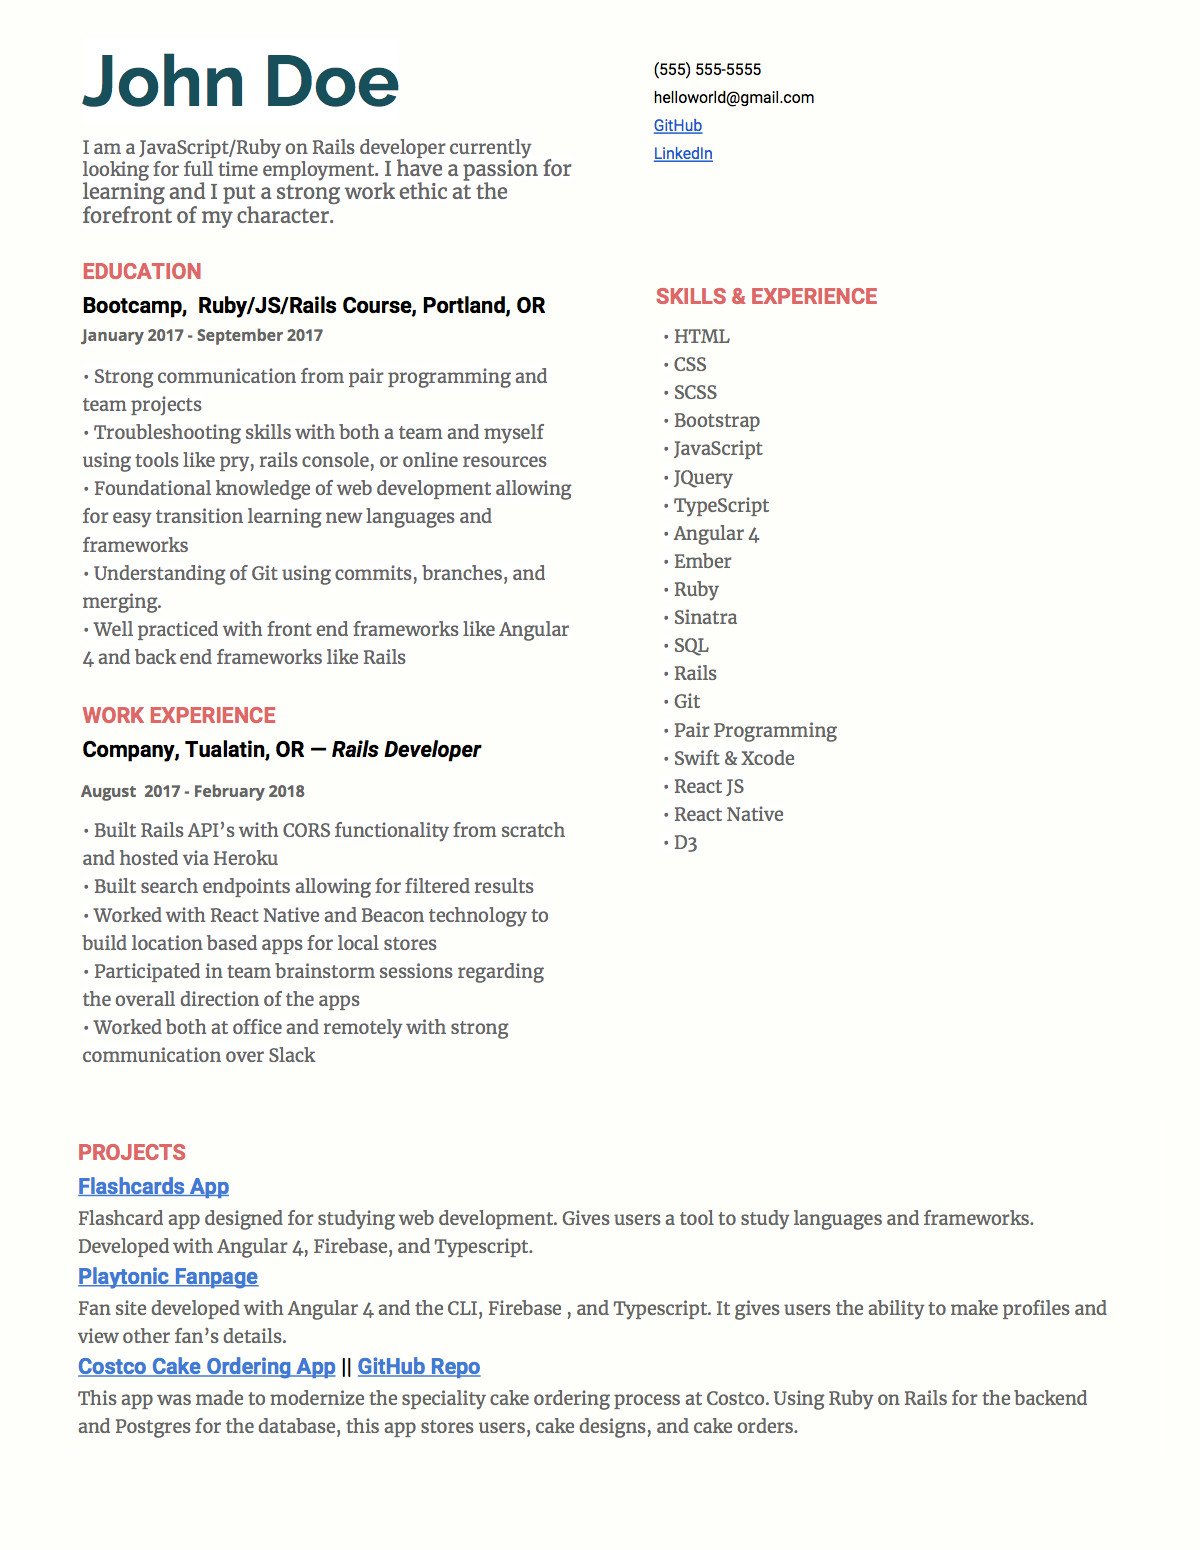 web developer 2 years experience tear this apart